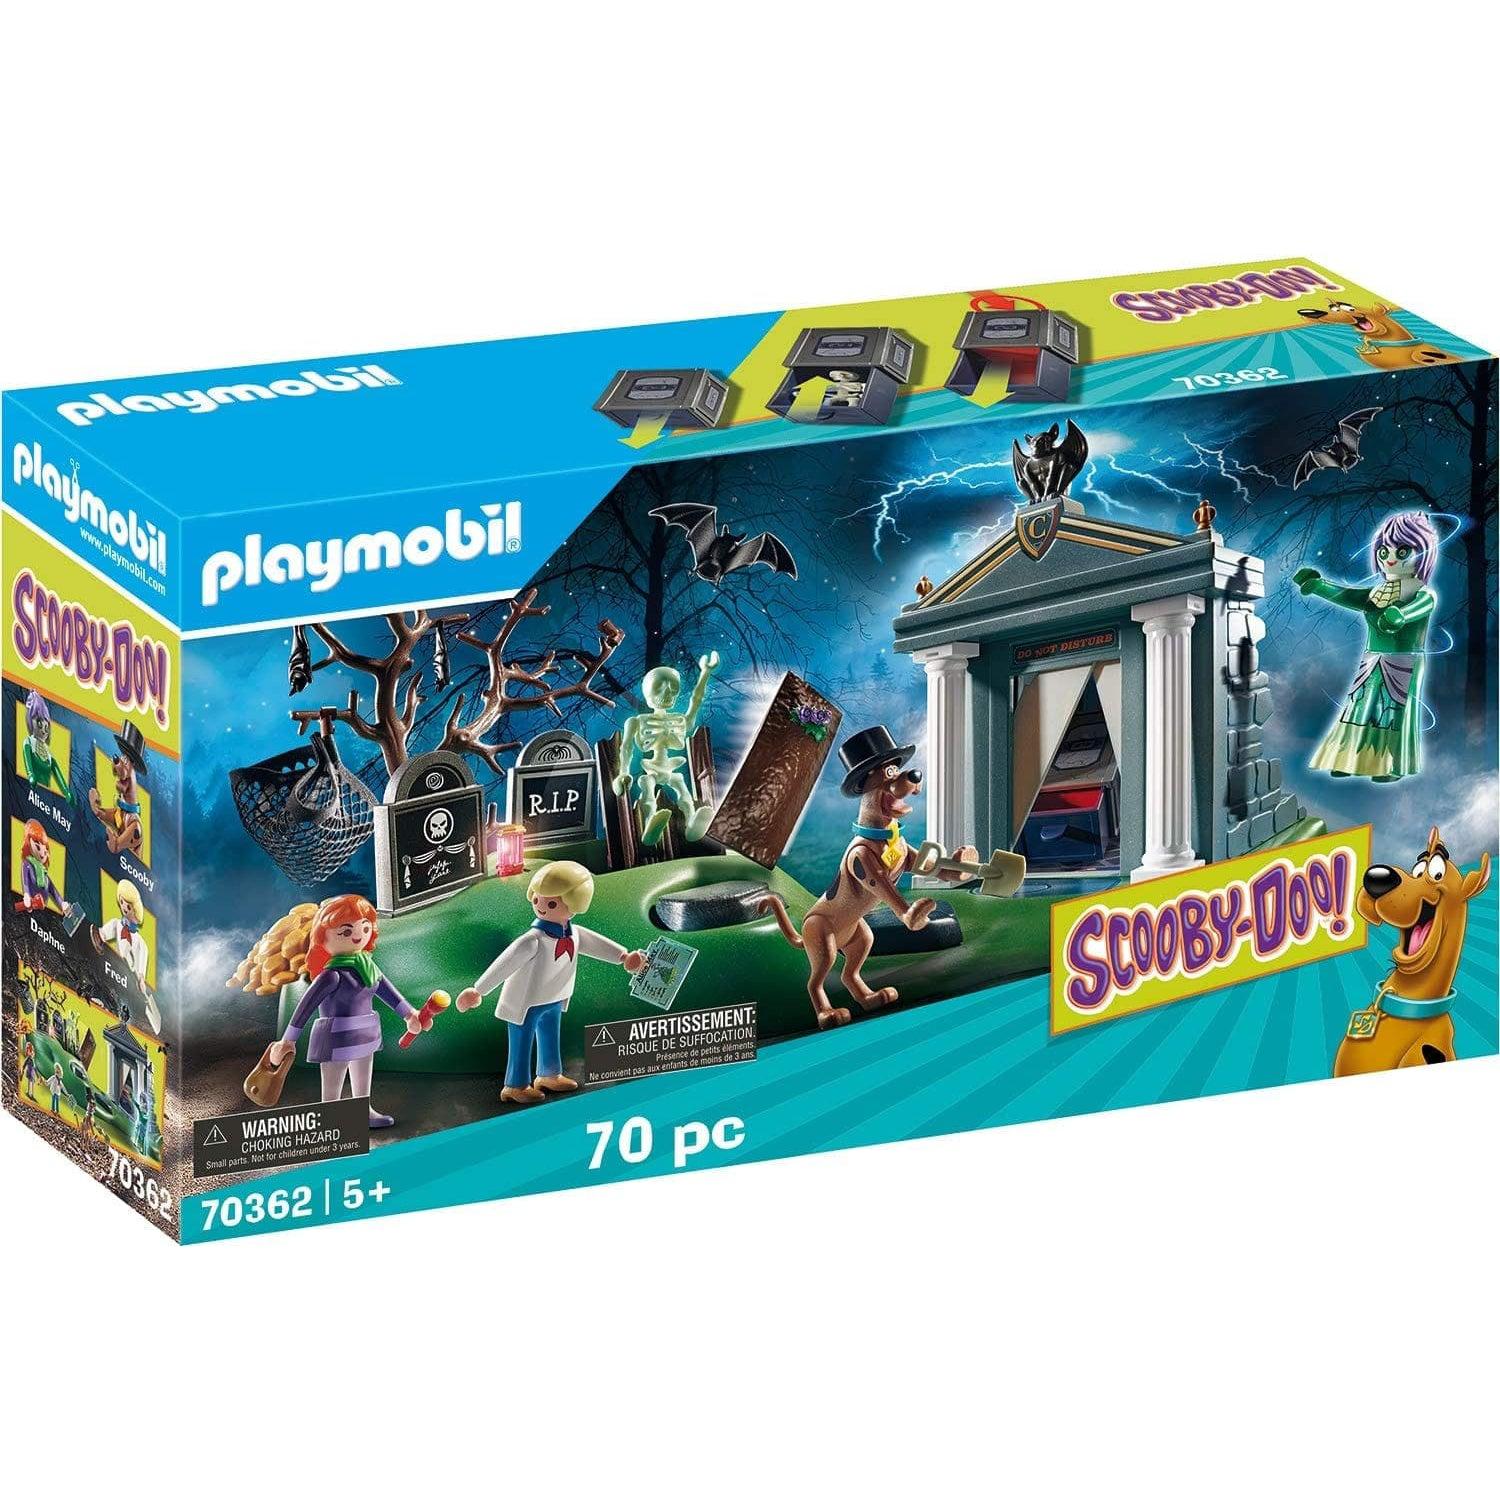 Playmobil-SCOOBY-DOO! Adventure in the Cemetery-70362-Legacy Toys